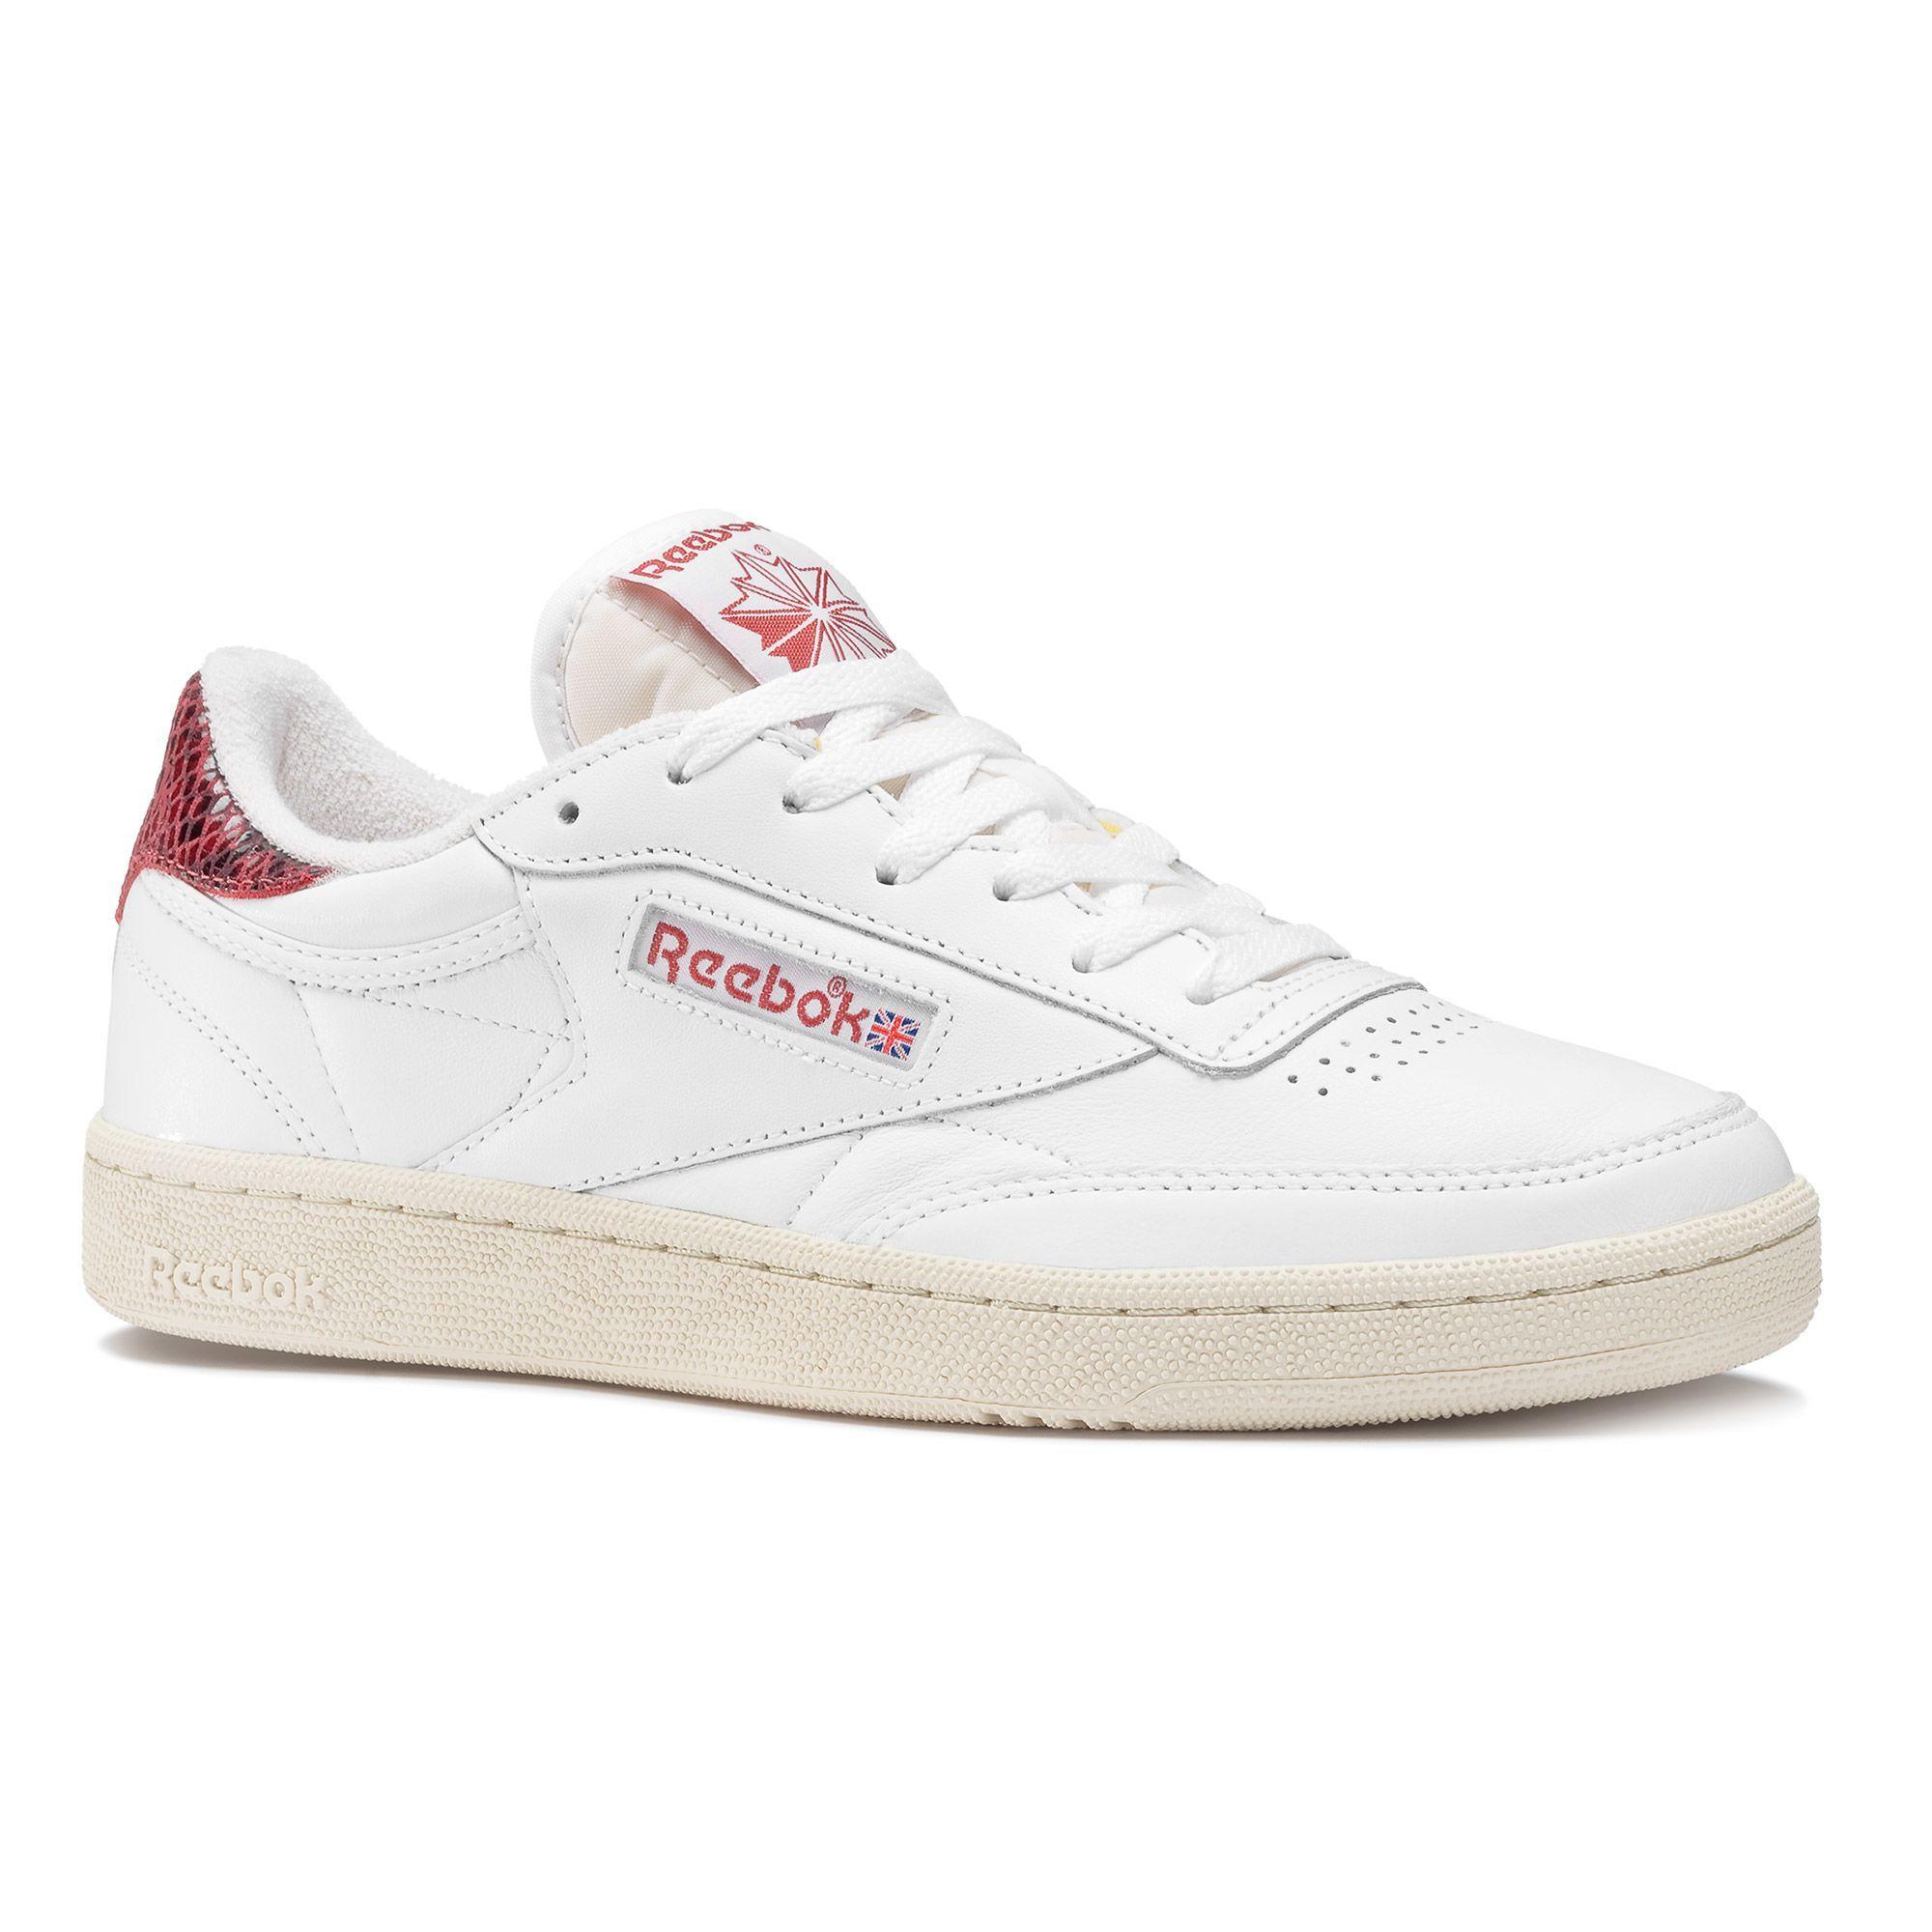 Red White and vs Logo - Cheap Reebok Club C 85 Vs Classic Shoes Sneakers White Red